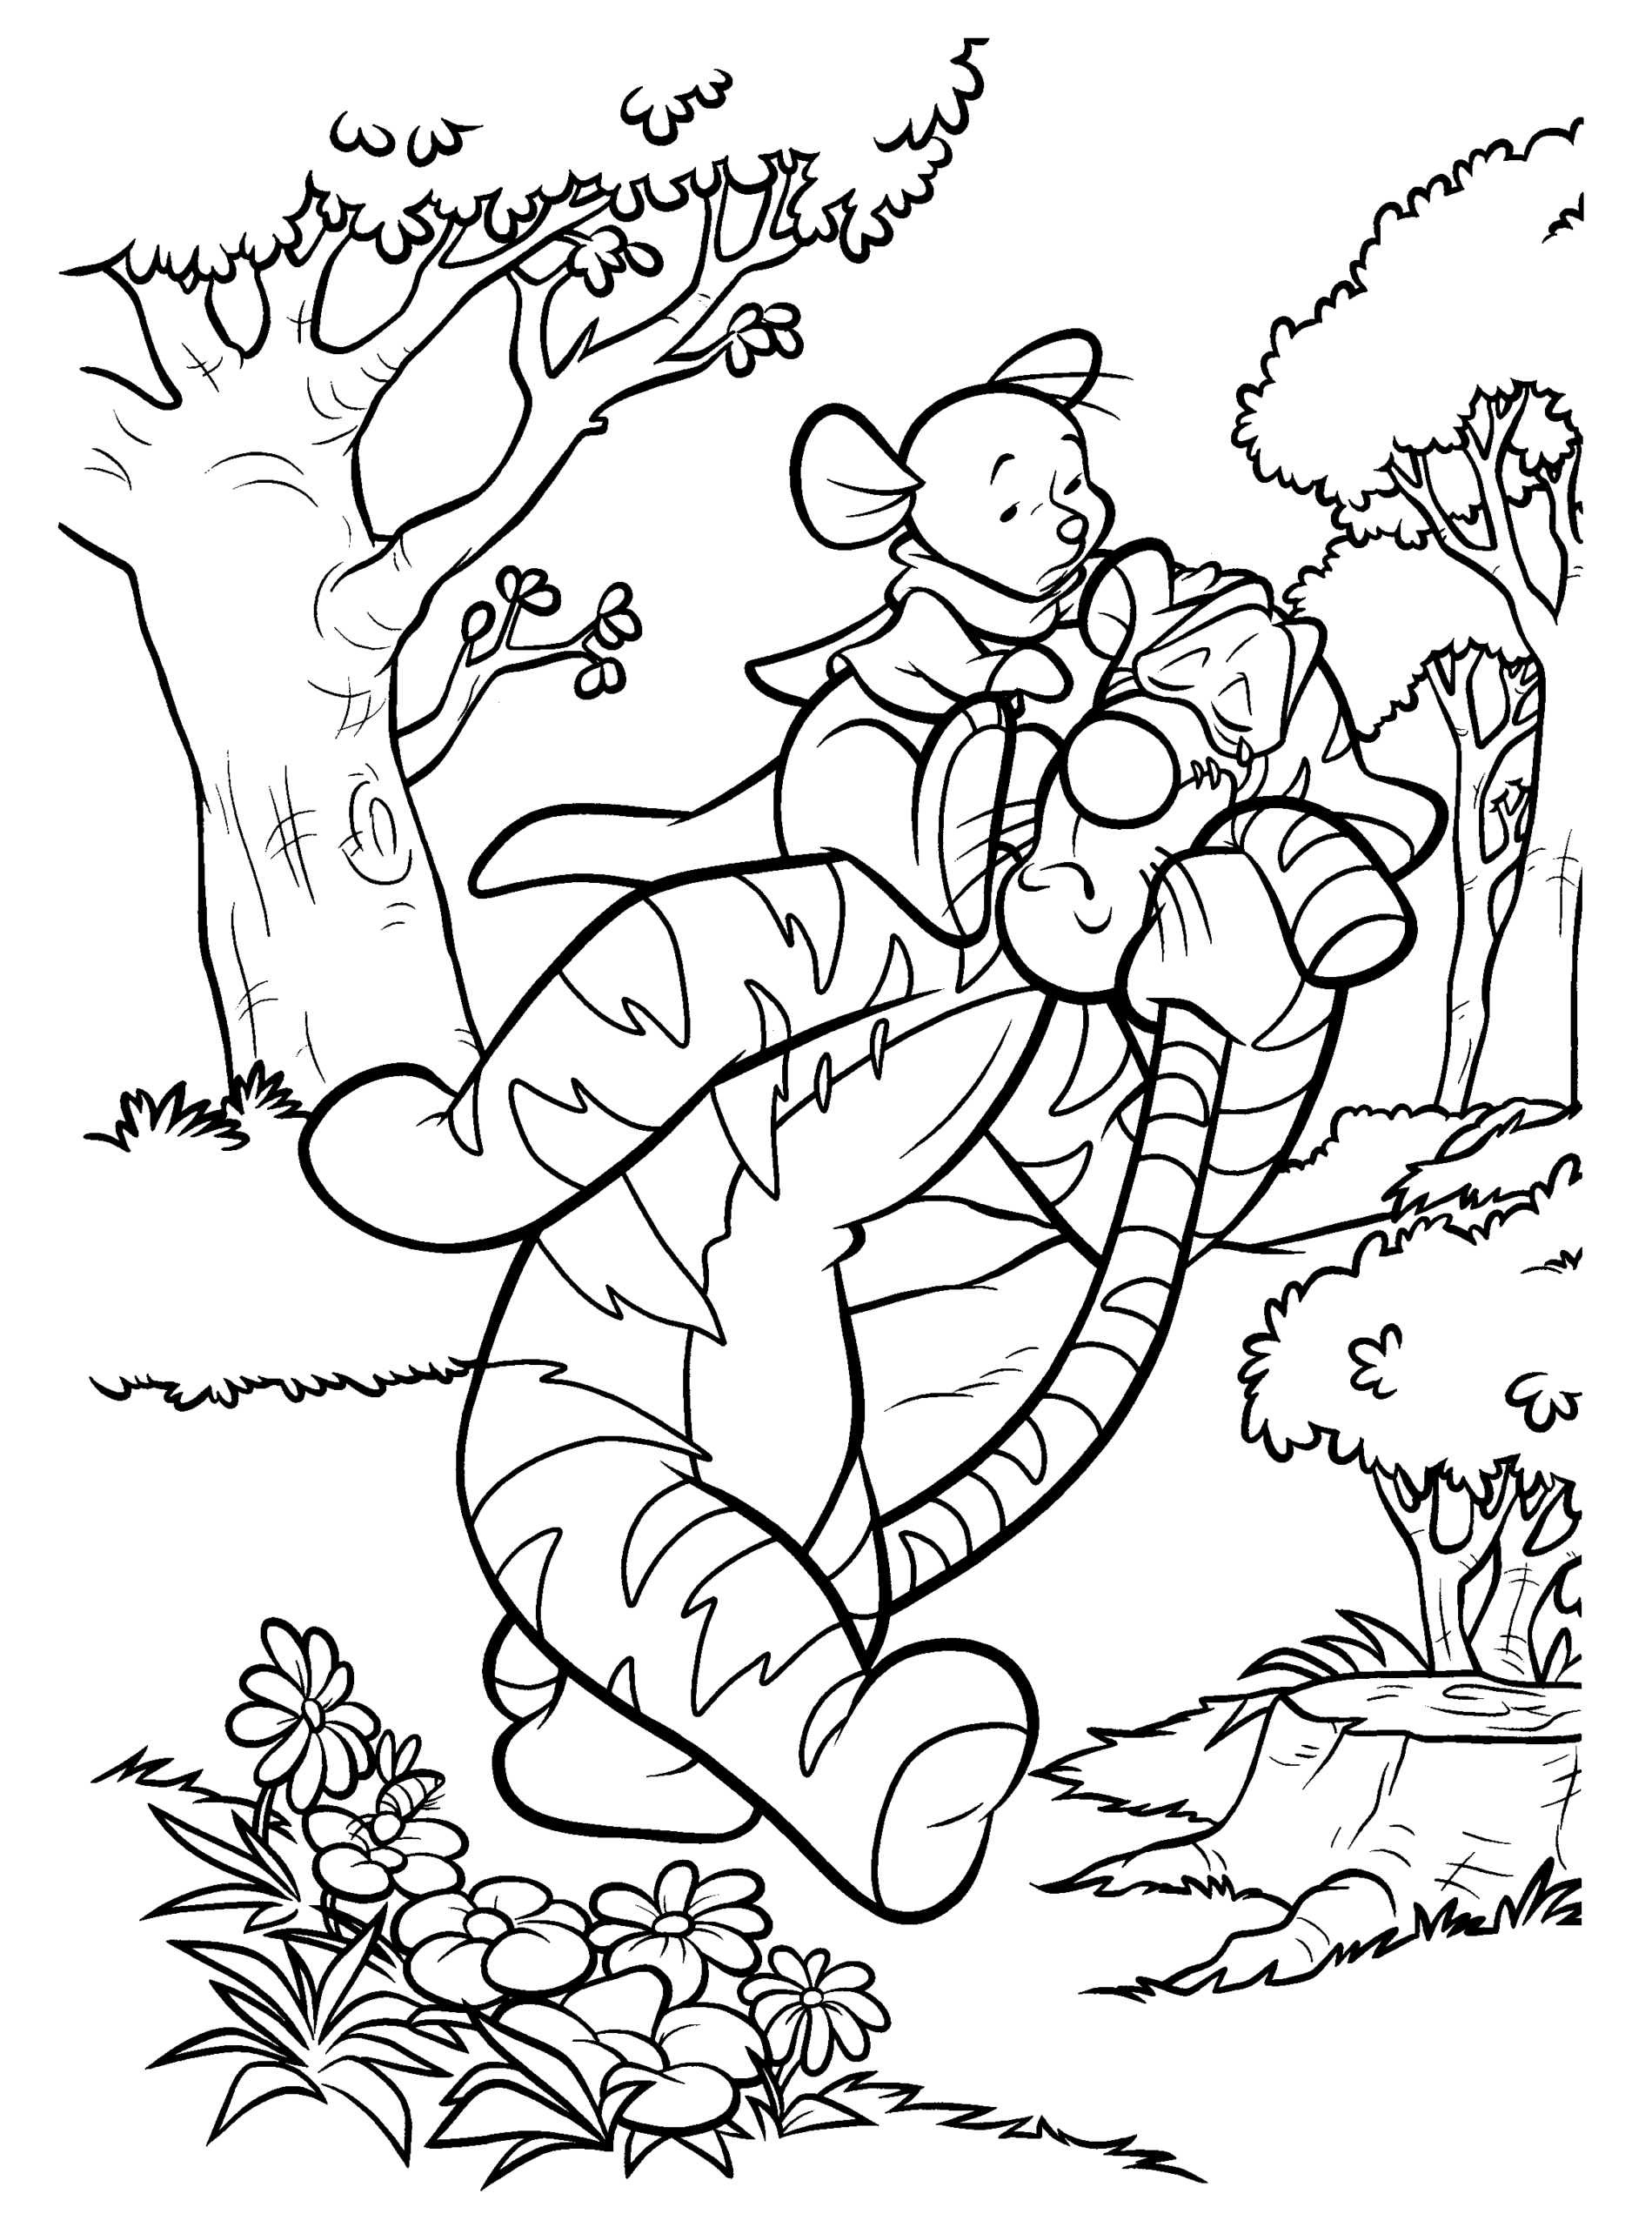 Winnie the Pooh Coloring Pages Cartoons winnie the pooh 18 Printable 2020 7112 Coloring4free